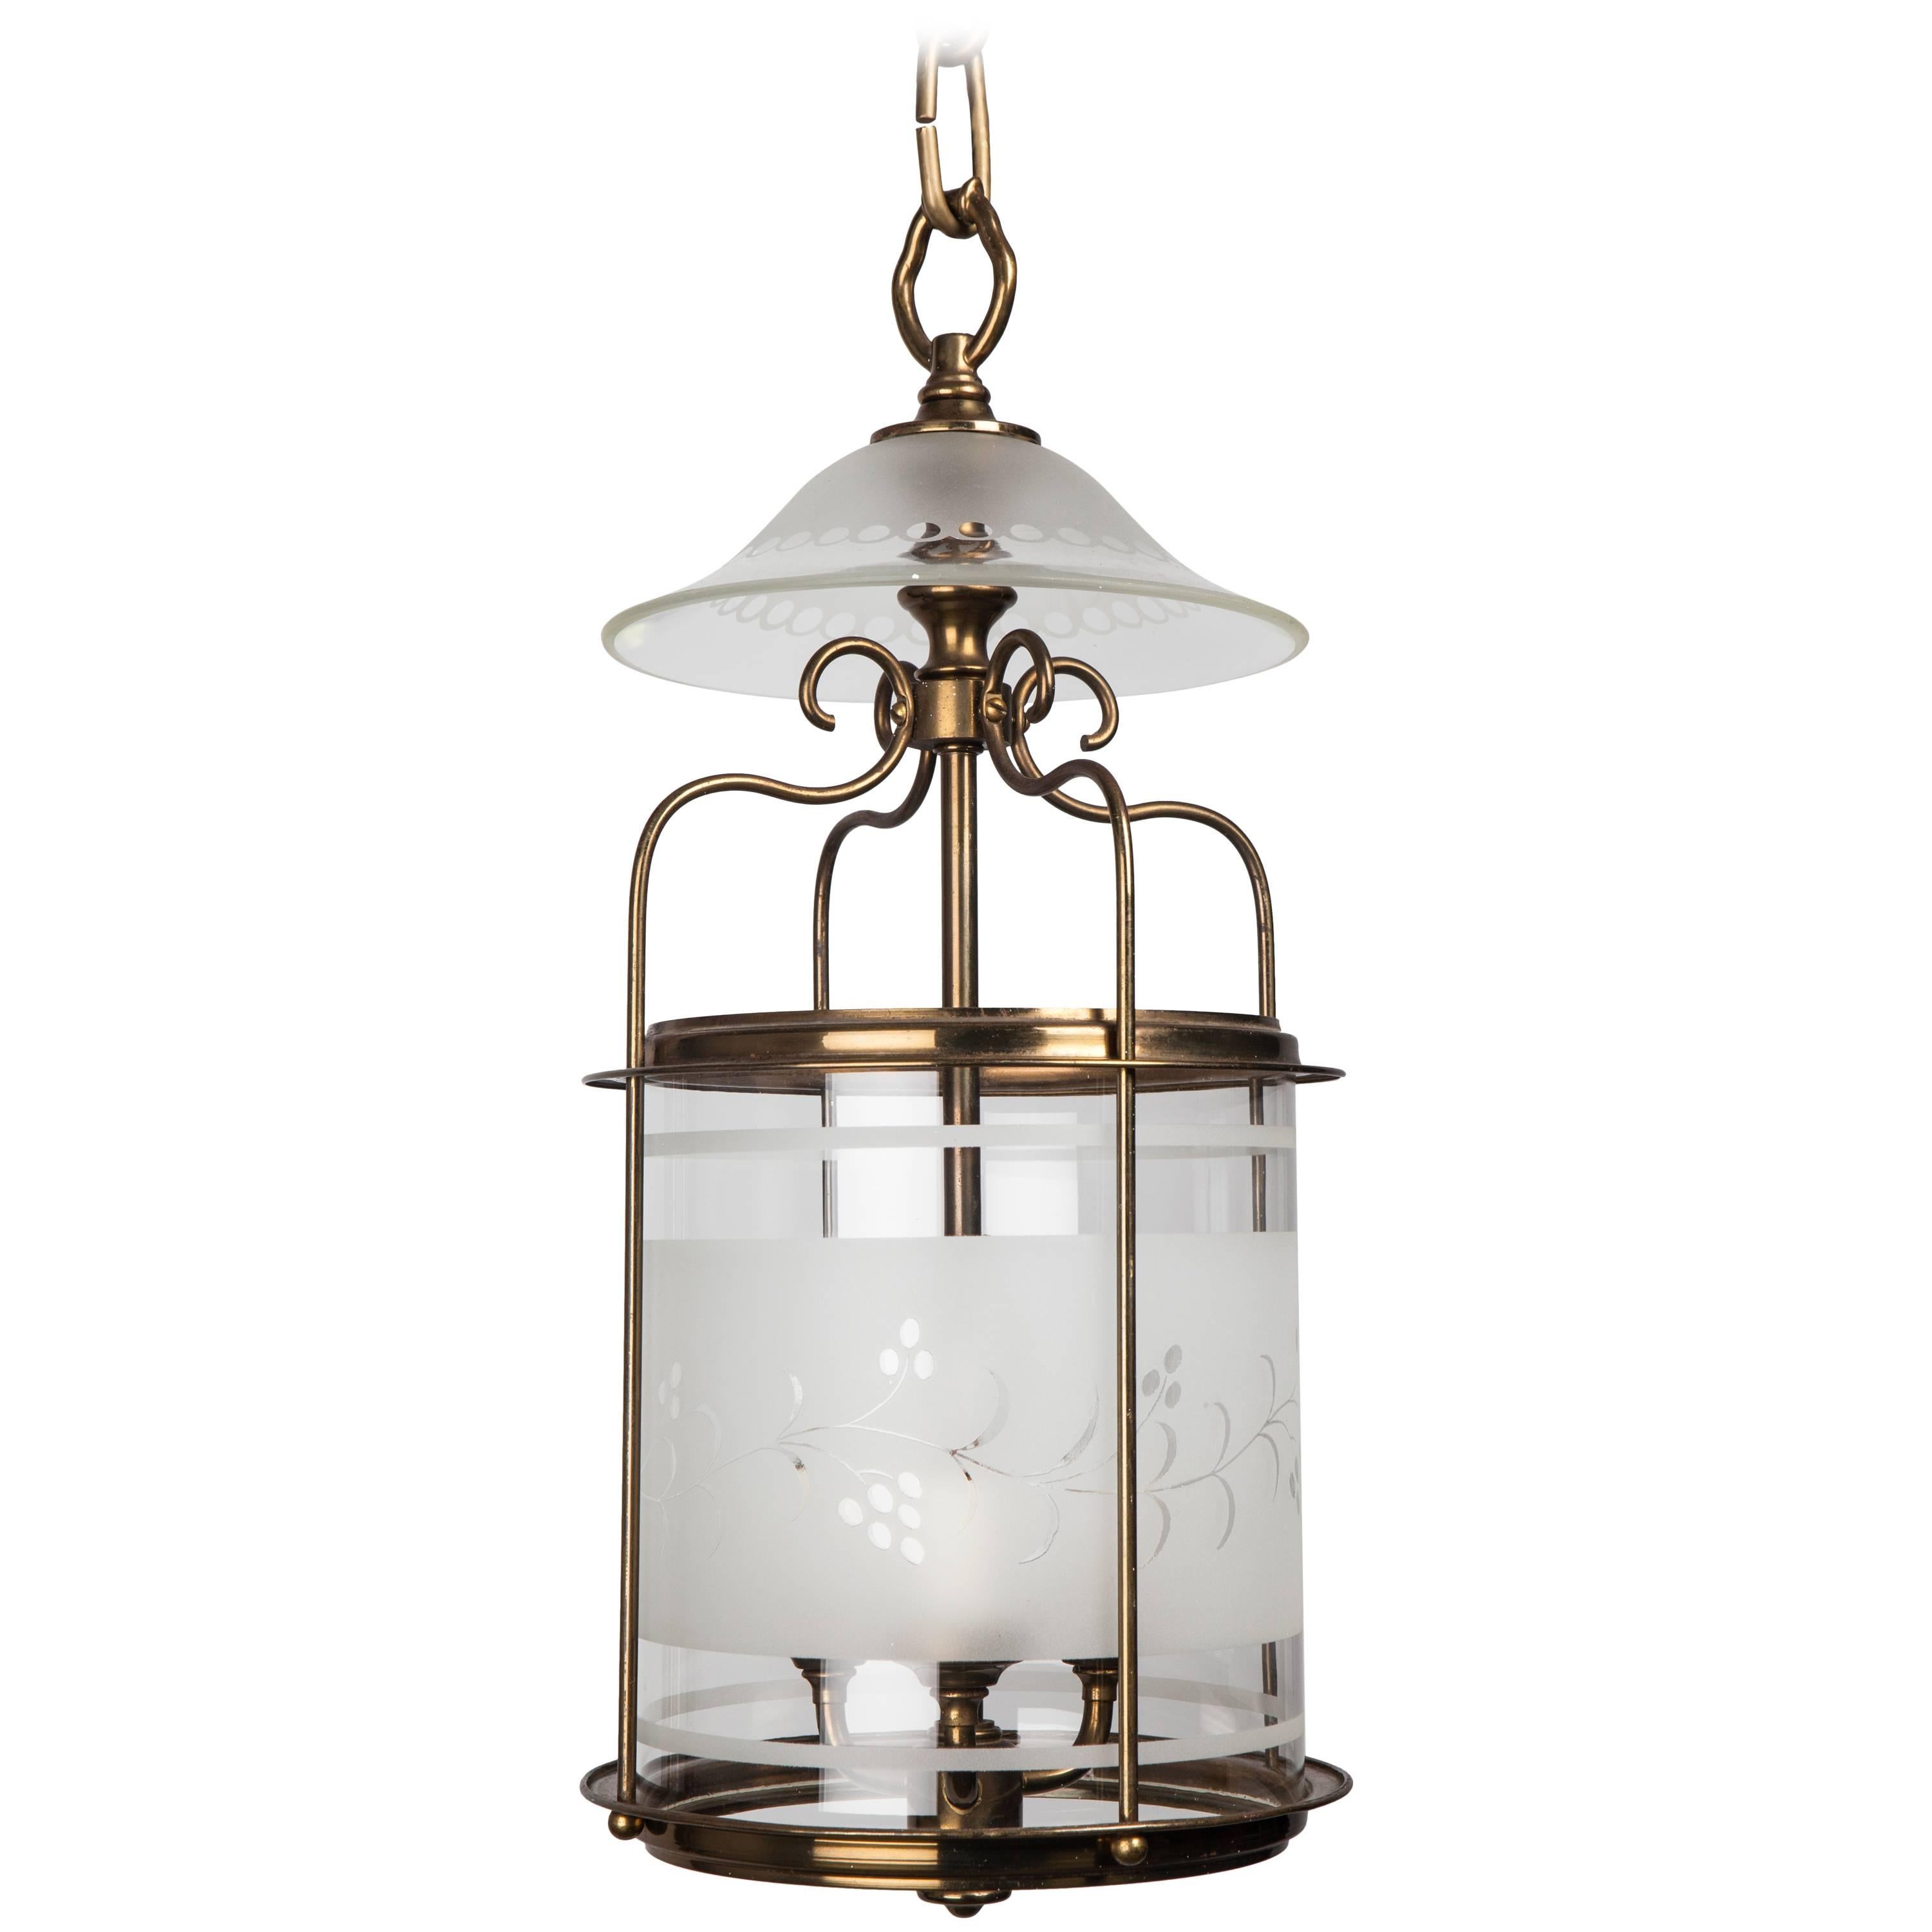 Etched Glass and Brass Lantern, circa 1930